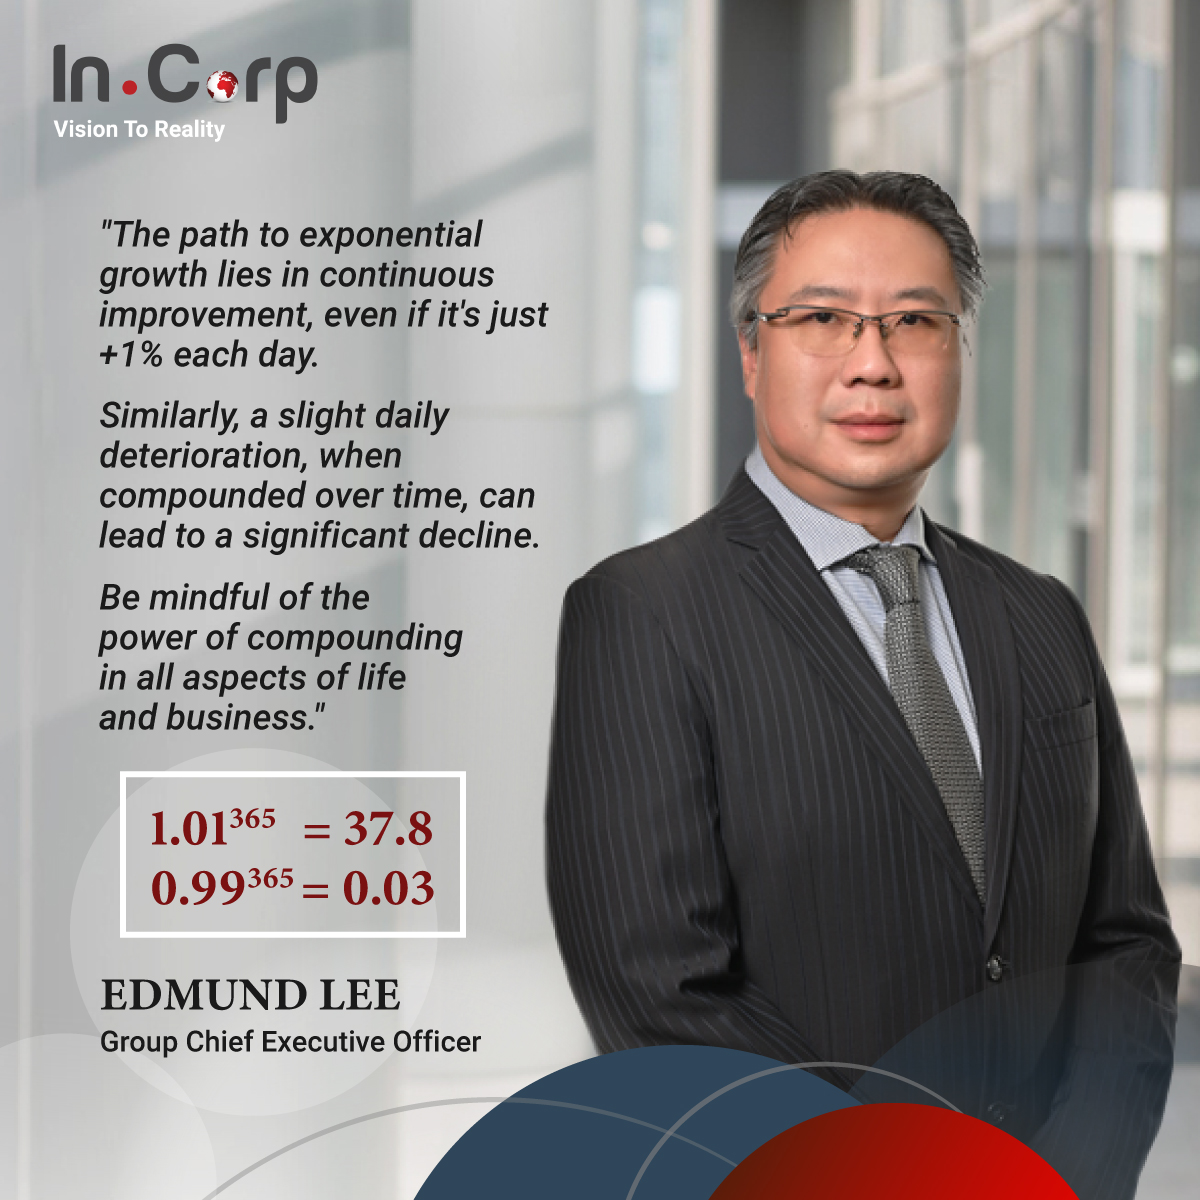 Self-improvement is the key to growth.🌱 Our Group CEO Edmund Lee, shares his thoughts on the importance of continuous improvement to attain exponential growth. Even just a little effort goes a long way.💯 incorp.asia #InCorpGlobal #SelfImprovement #BusinessGrowth